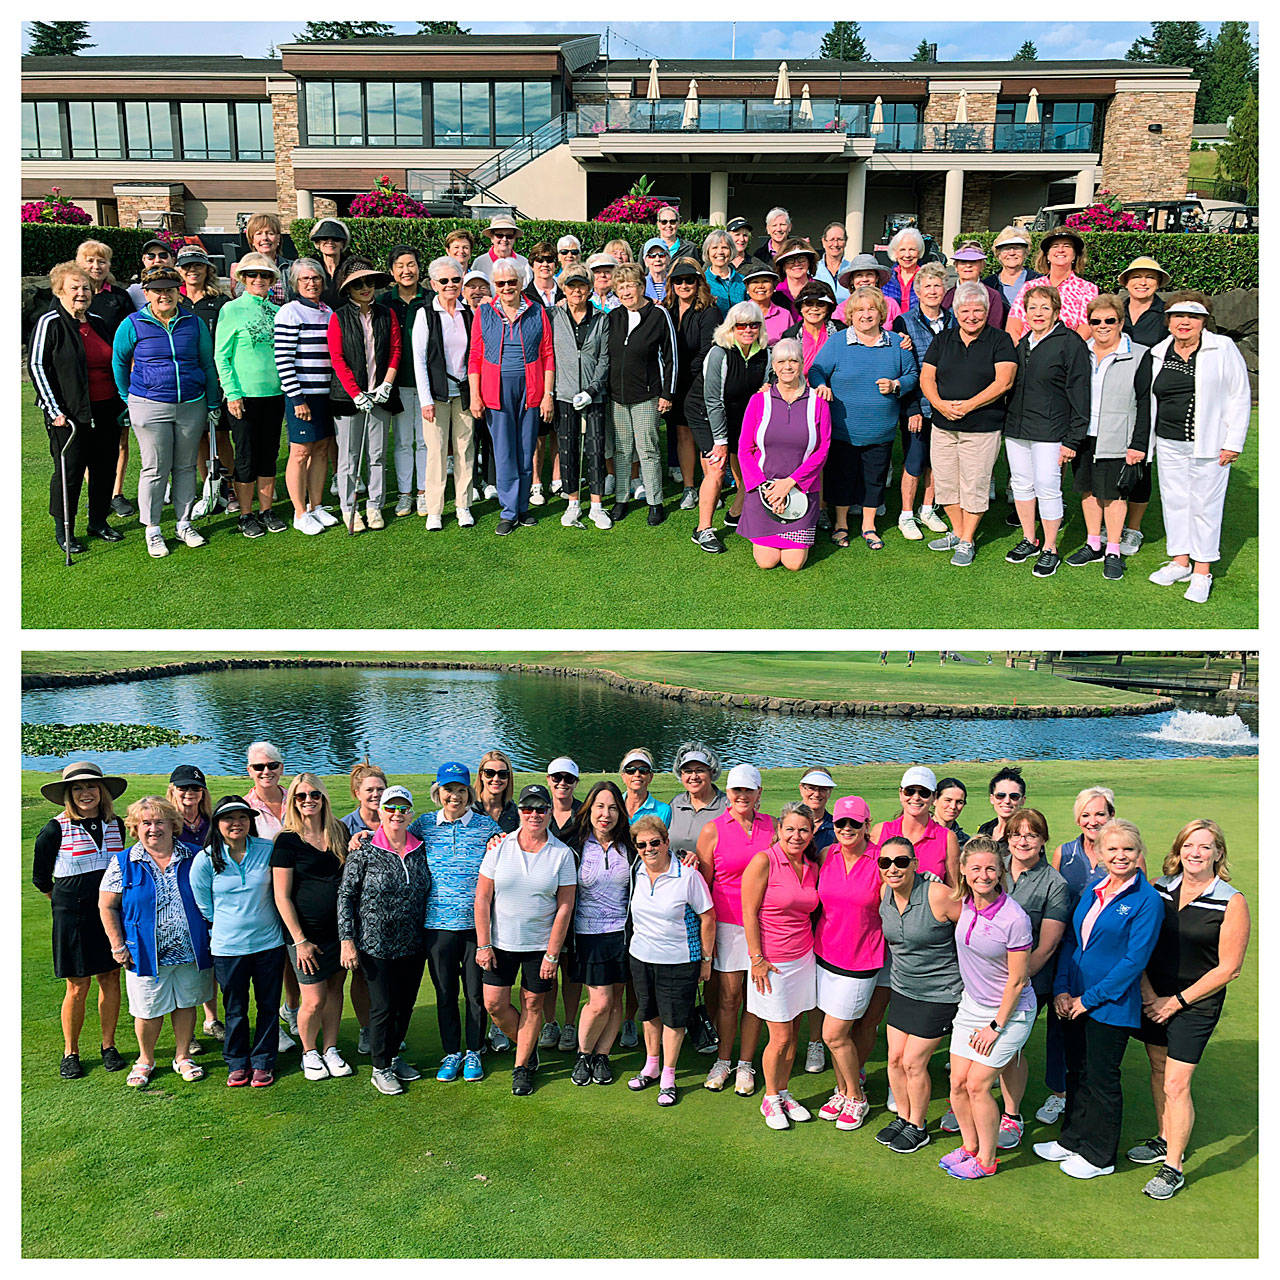 The women’s division – day and twilight groups – at Meridian Valley Country Club raised awareness and money for the Seattle Cancer Care Alliance House. COURTESY PHOTOS